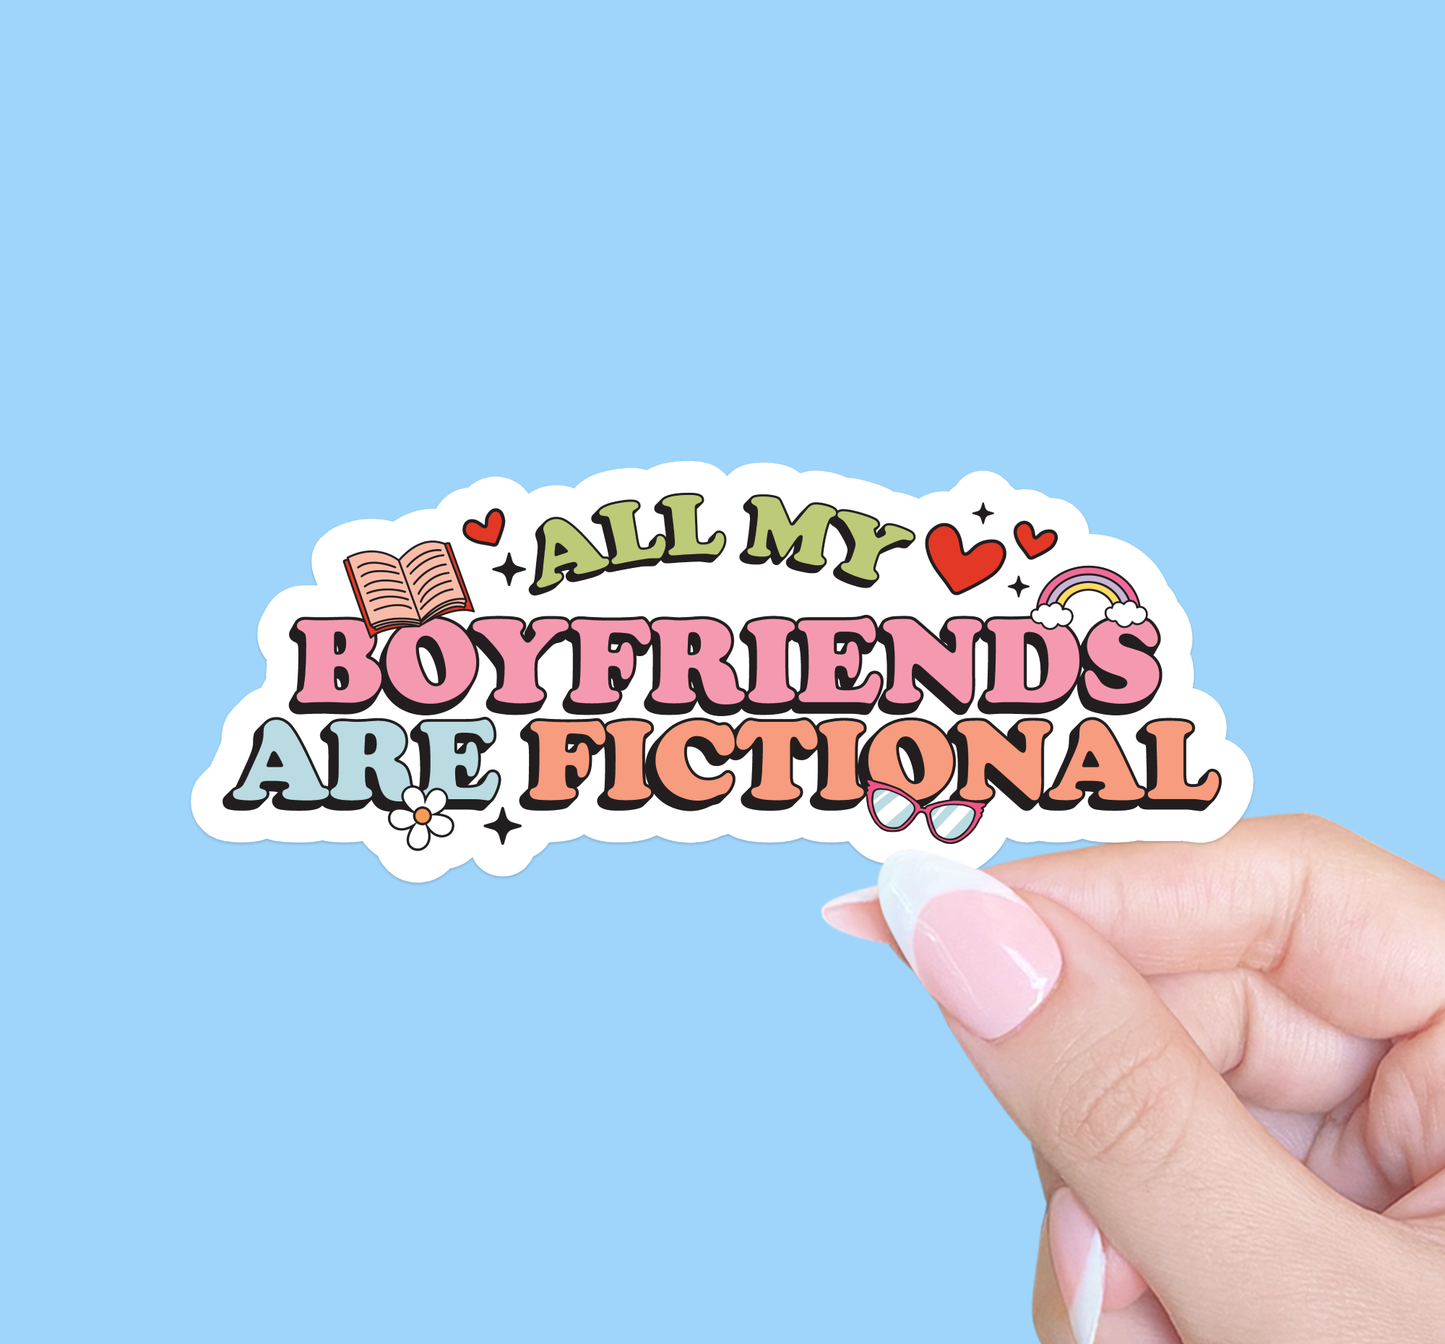 All my boyfriends are fictional